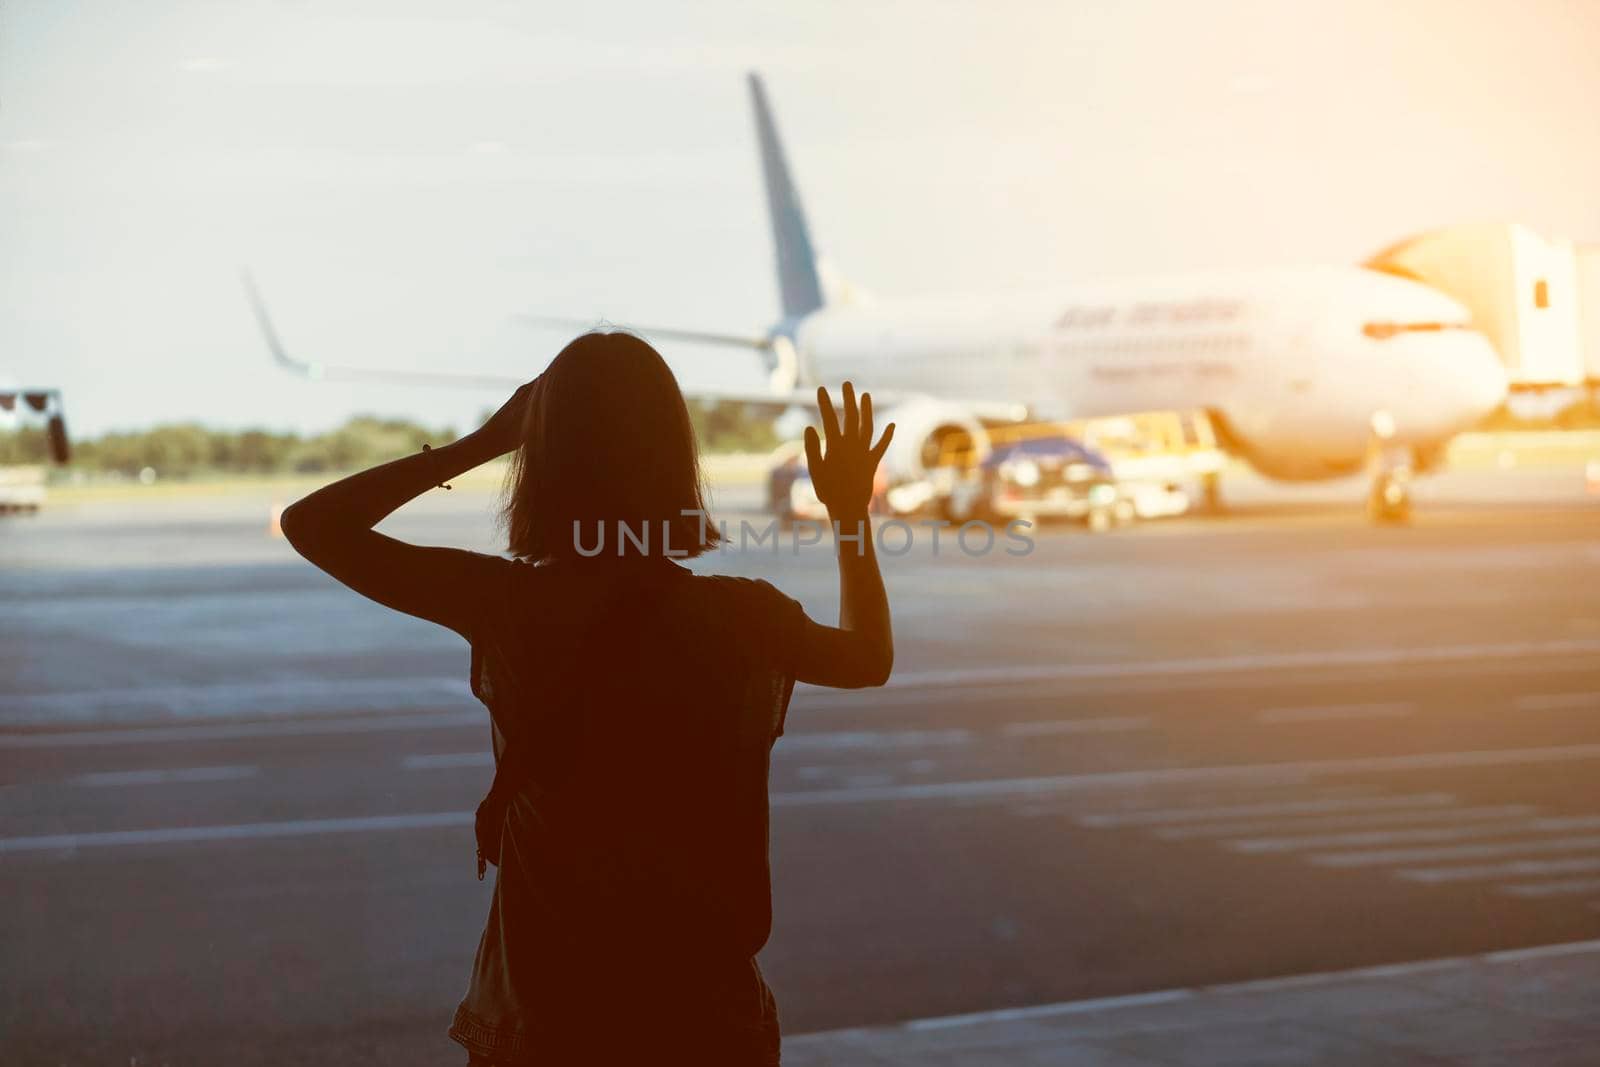 A young girl at the airport waving to the plane on the runway at sunset. Silhouette of a traveler near the window in the transfer area.